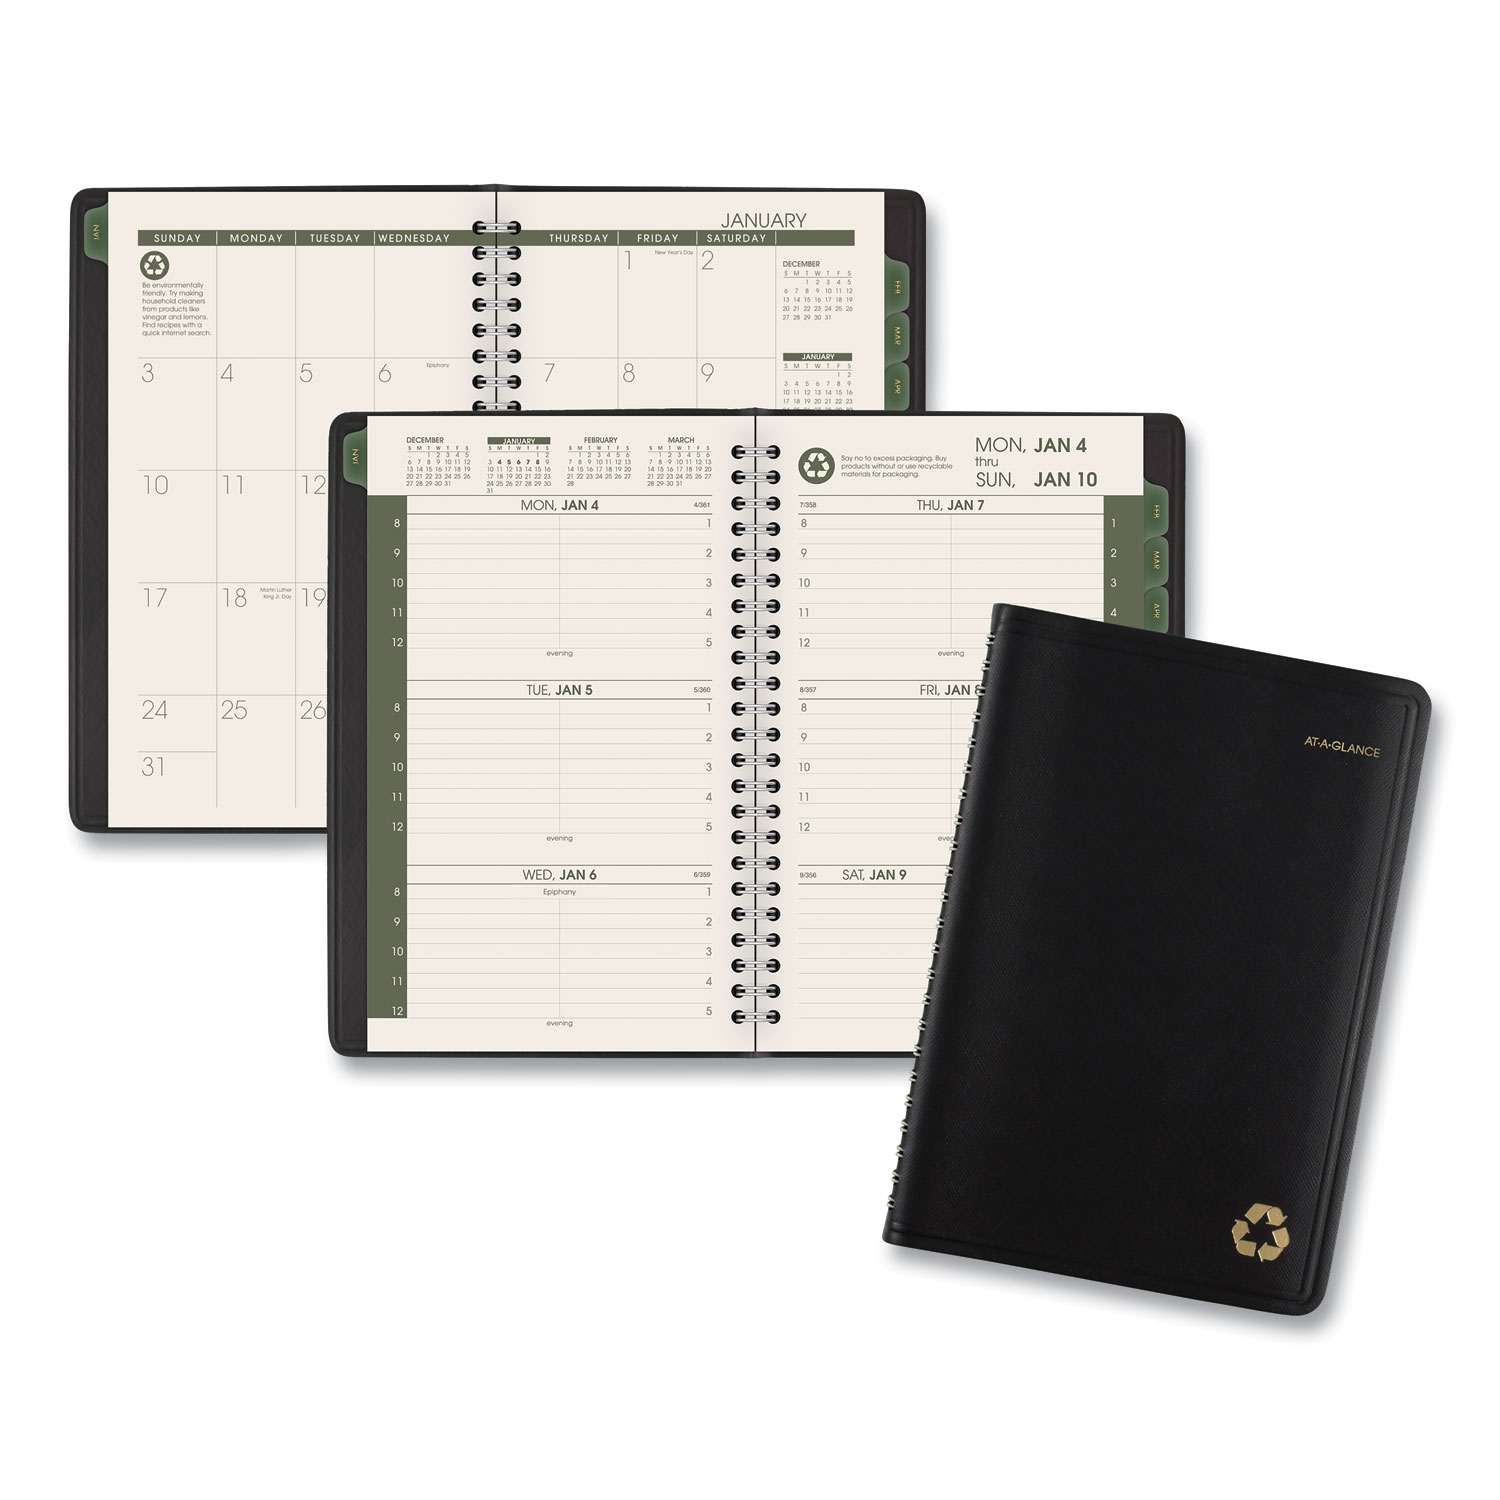  AT-A-GLANCE 70100G05 Recycled Weekly/Monthly Appointment Book, 8 x 4.88, Black, 2020 (AAG70100G05) 